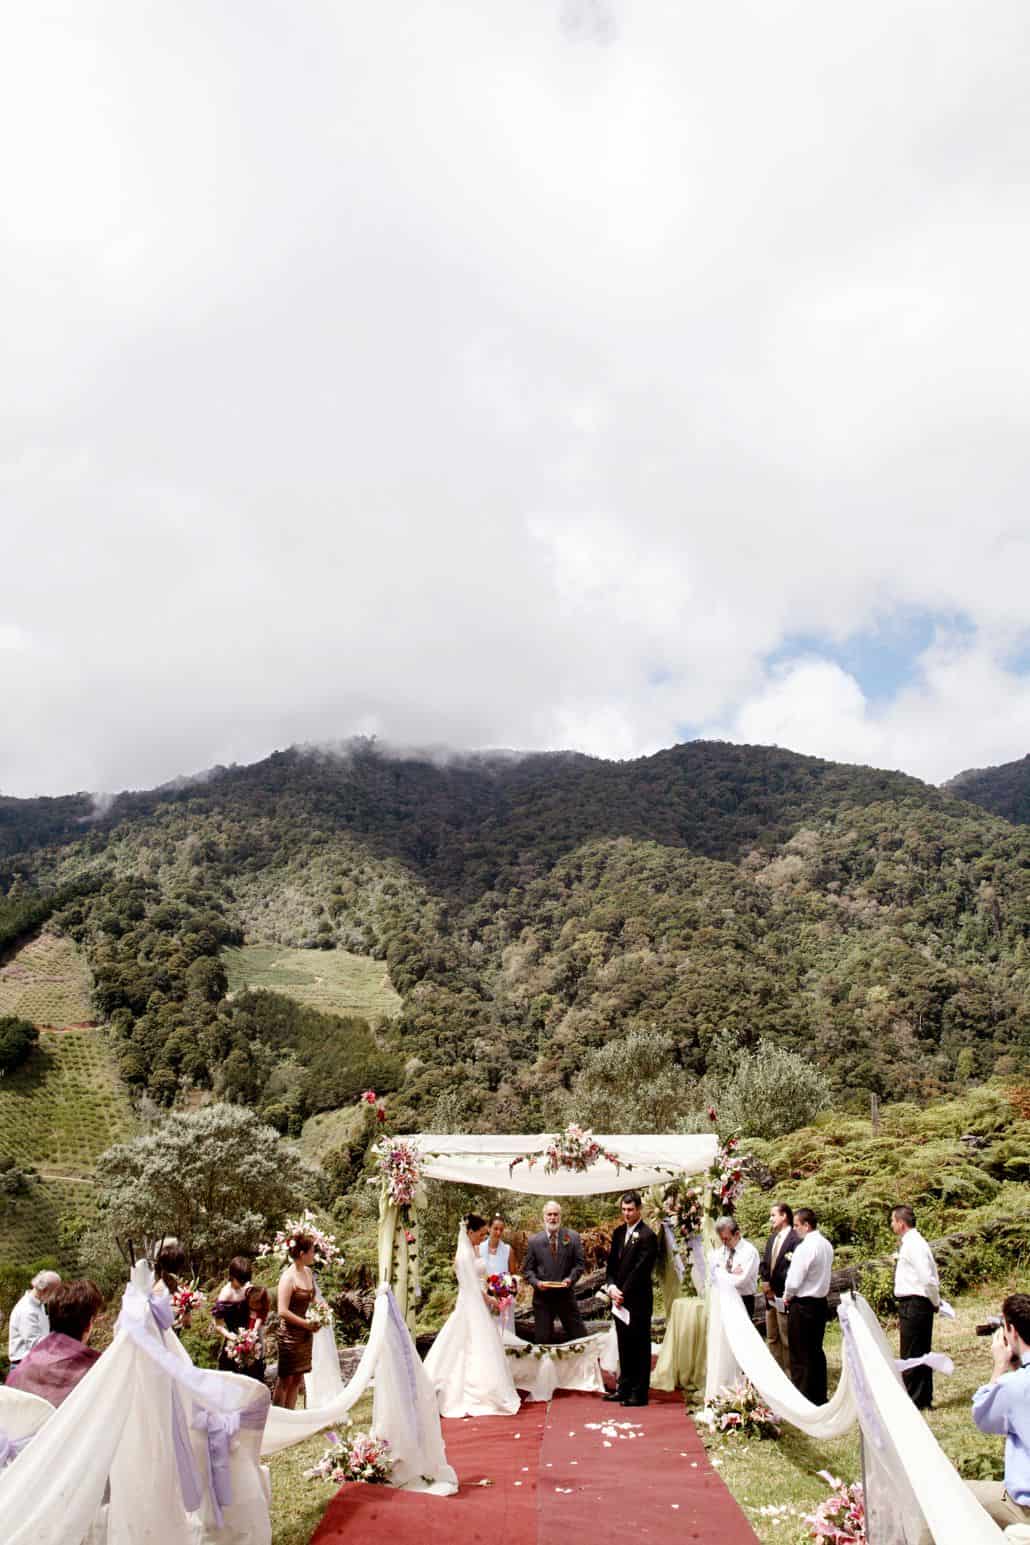 San Gerardo de Dota, Talamanca cloud forest wedding ceremony at Costa Rican destination wedding. Red carpeted aisle, white aisle swag with purple ribbons, bride, groom and wedding party surrounded by green, forest covered mountains.